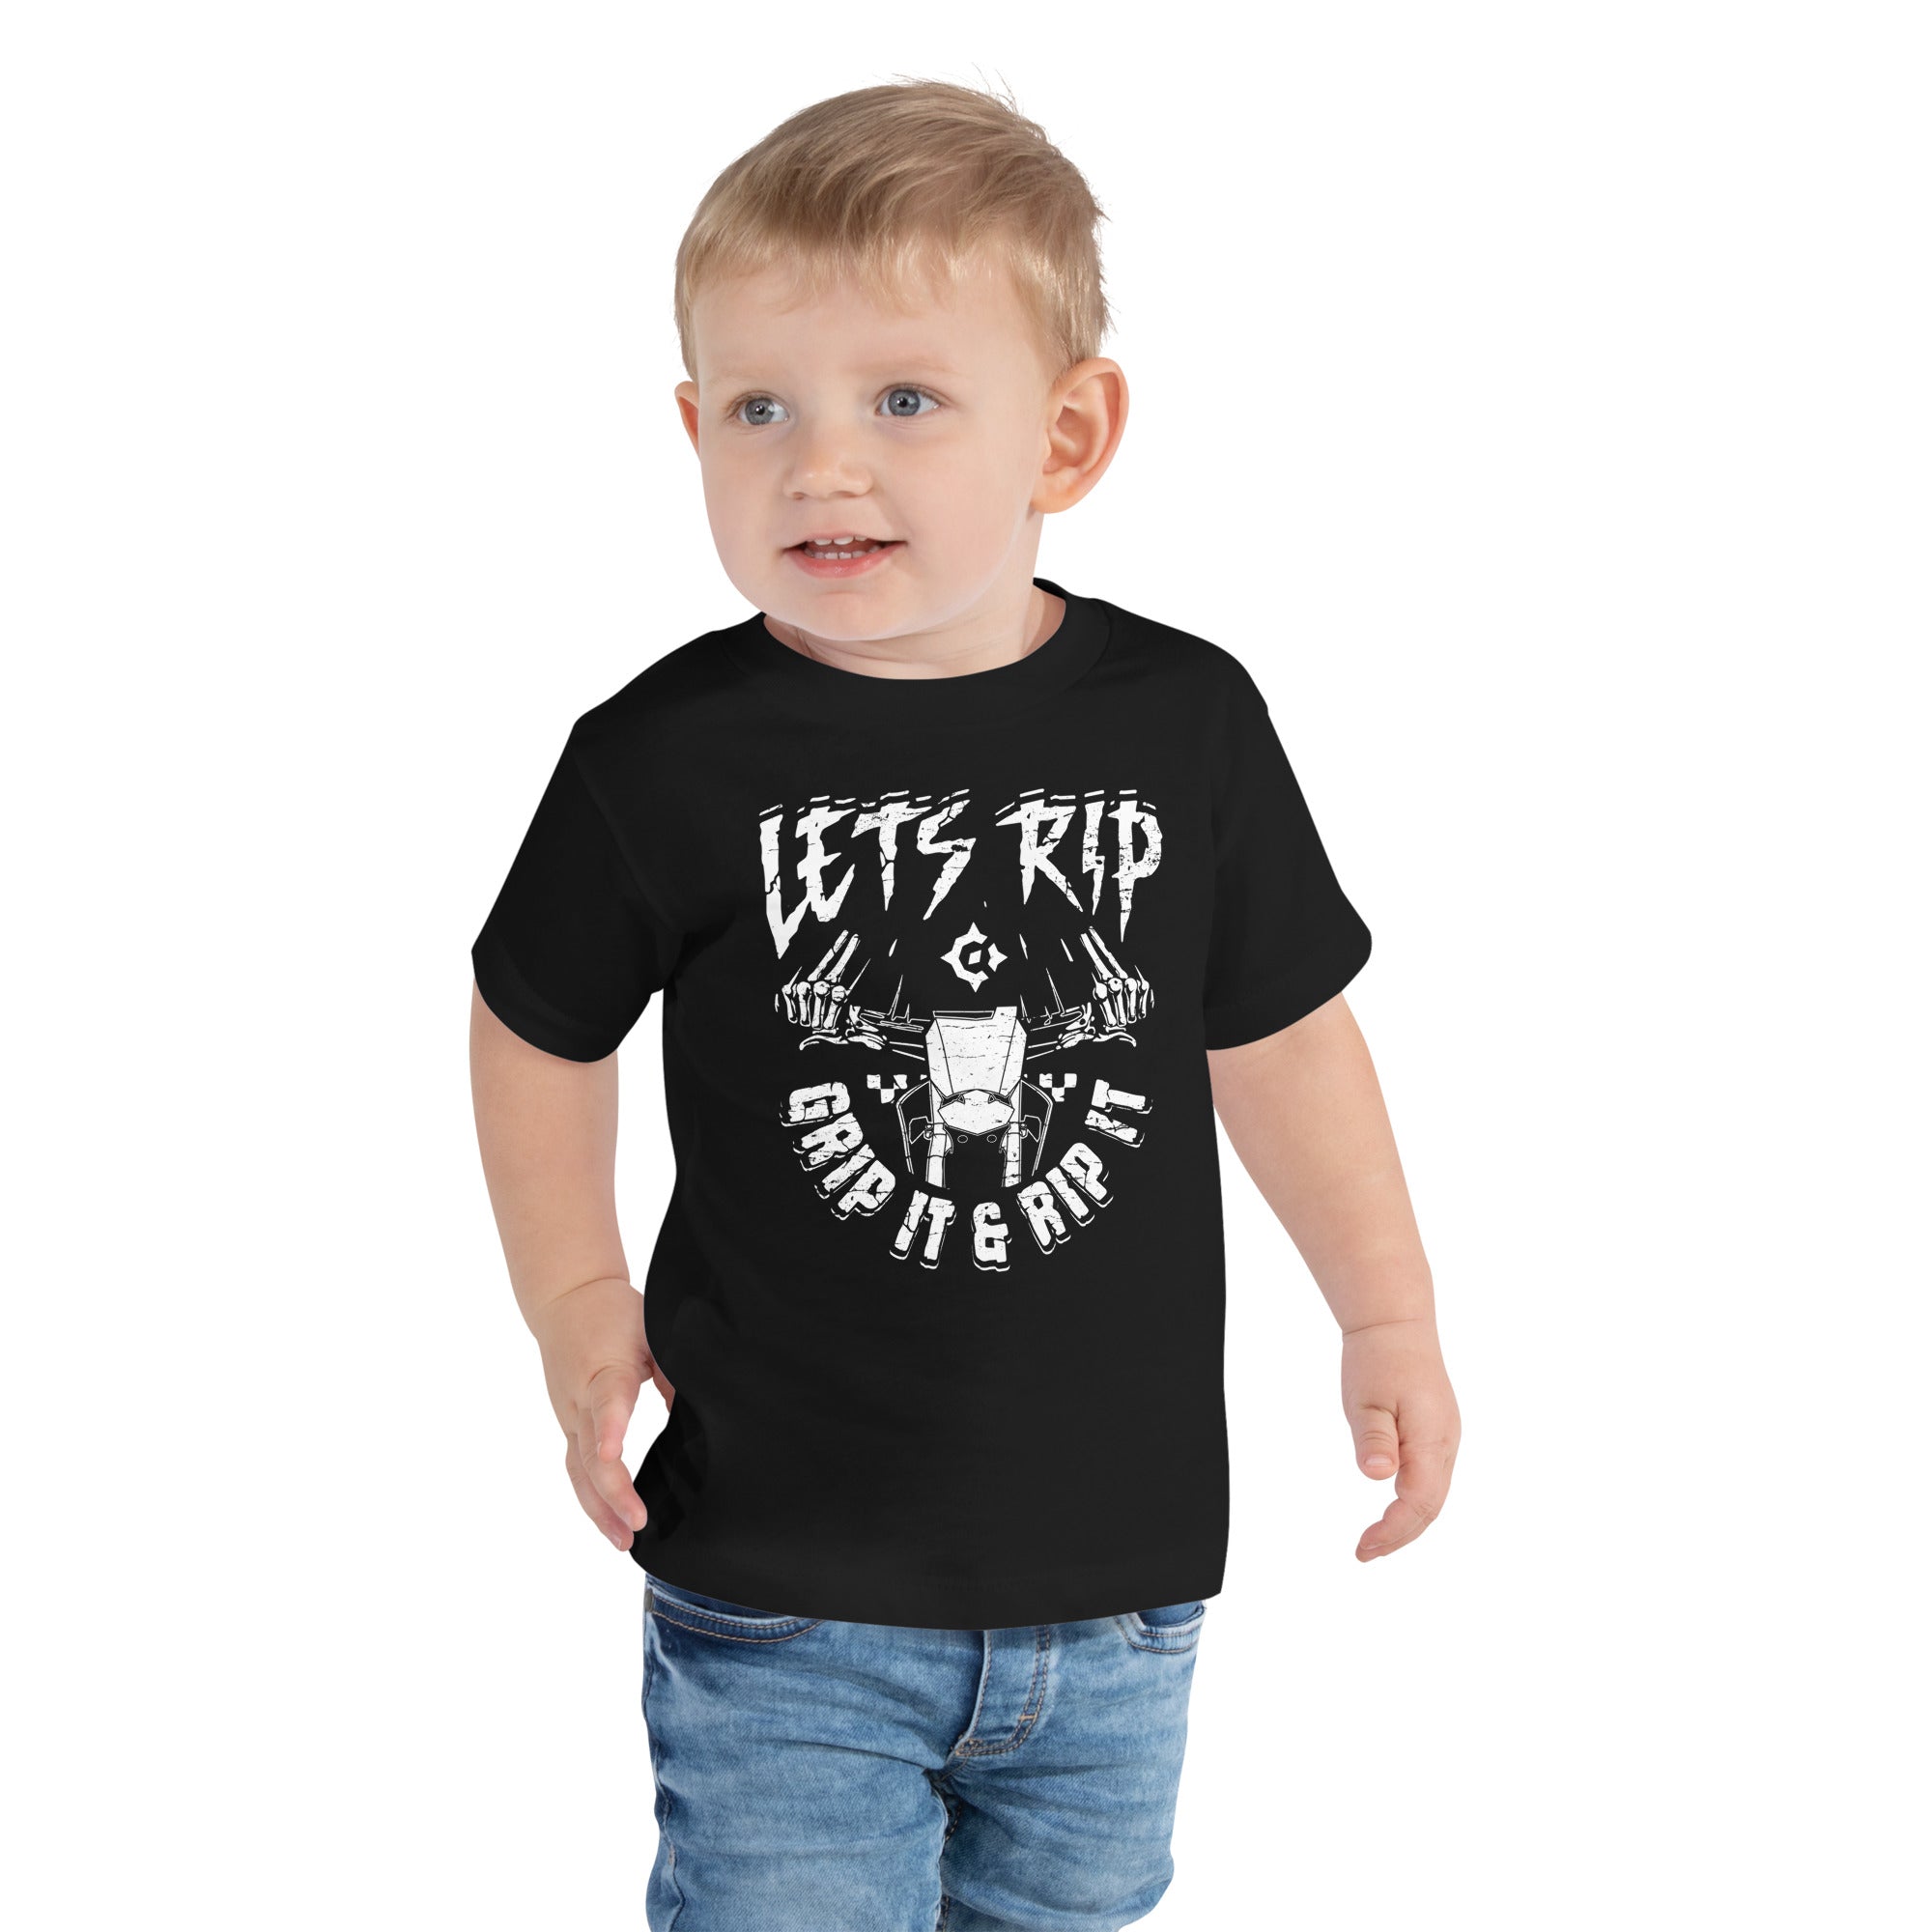 Let’s Rip Toddler Short Sleeve Tee